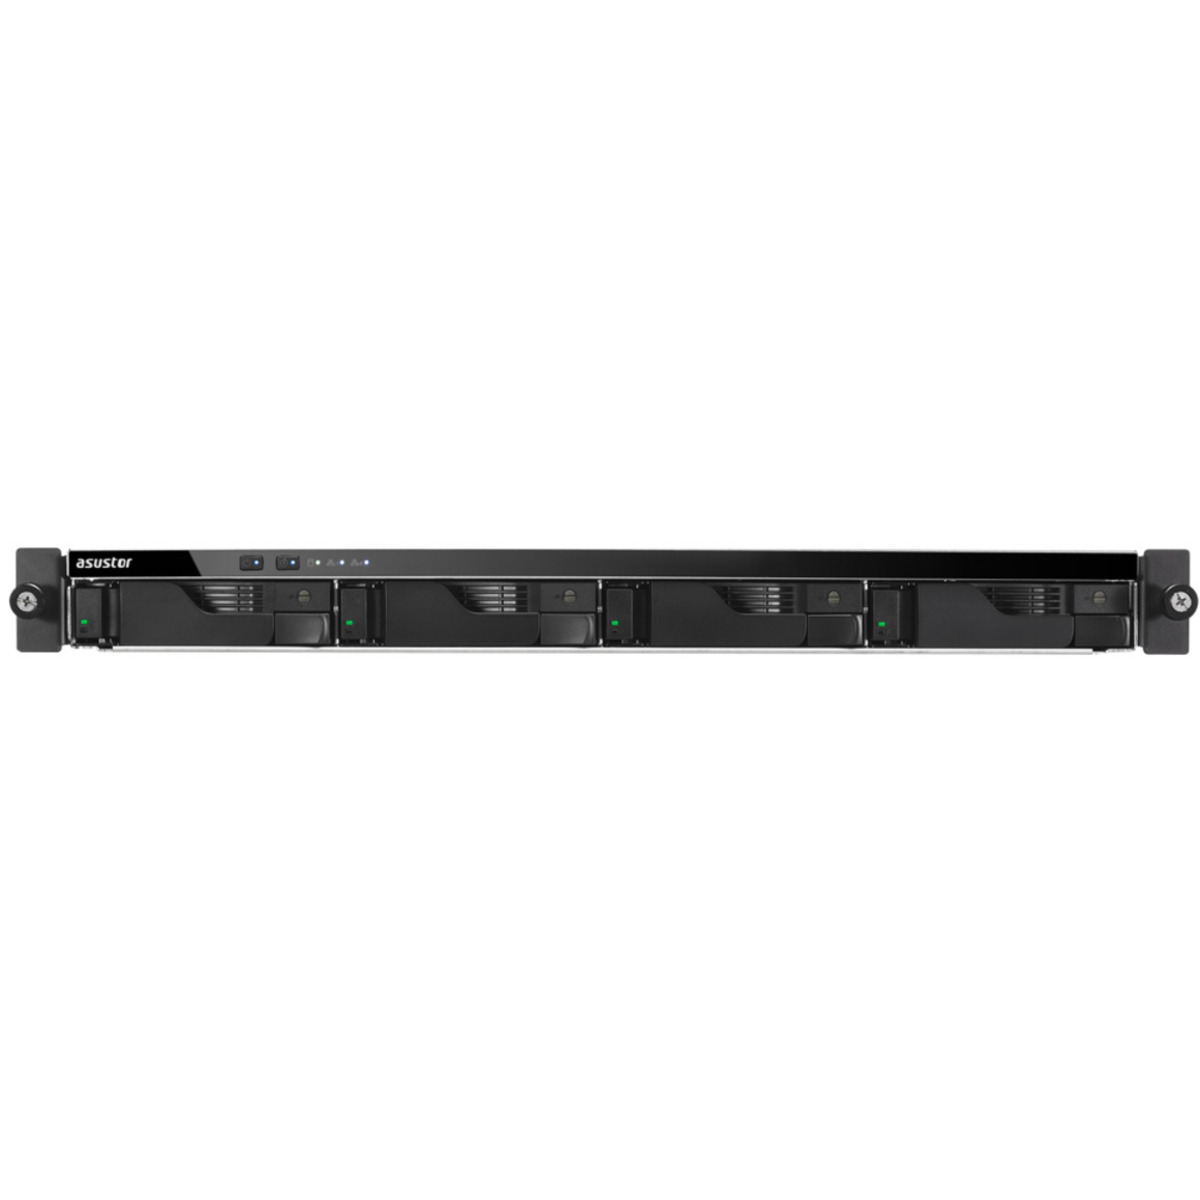 buy ASUSTOR LOCKERSTOR 4RD AS6504RD 16tb RackMount NAS - Network Attached Storage Device 4x4000gb Toshiba MN Series MN08ADA400E 3.5 7200rpm SATA 6Gb/s HDD NAS Class Drives Installed - Burn-In Tested - ON SALE - FREE RAM UPGRADE - nas headquarters buy network attached storage server device das new raid-5 free shipping simply usa LOCKERSTOR 4RD AS6504RD